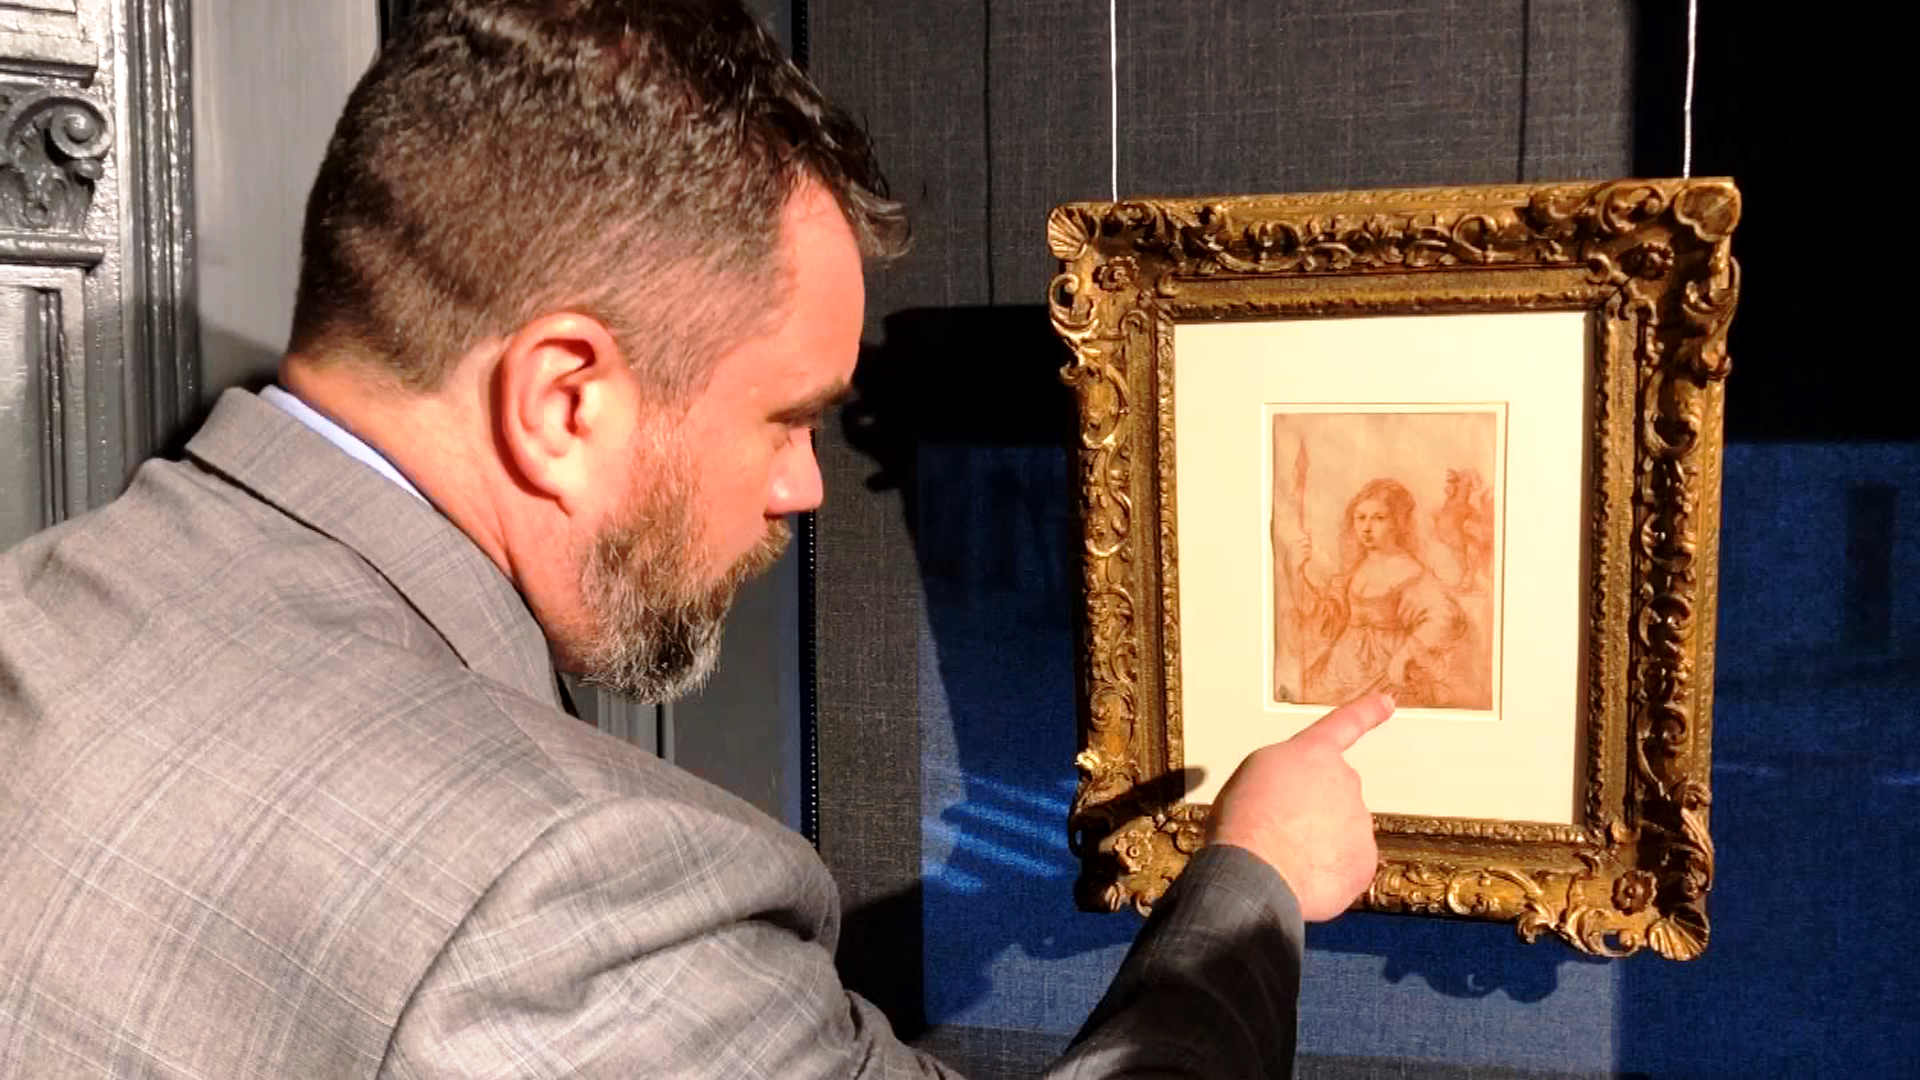 Art dealer with newest acquisition that ended up being more valuable than initially thought